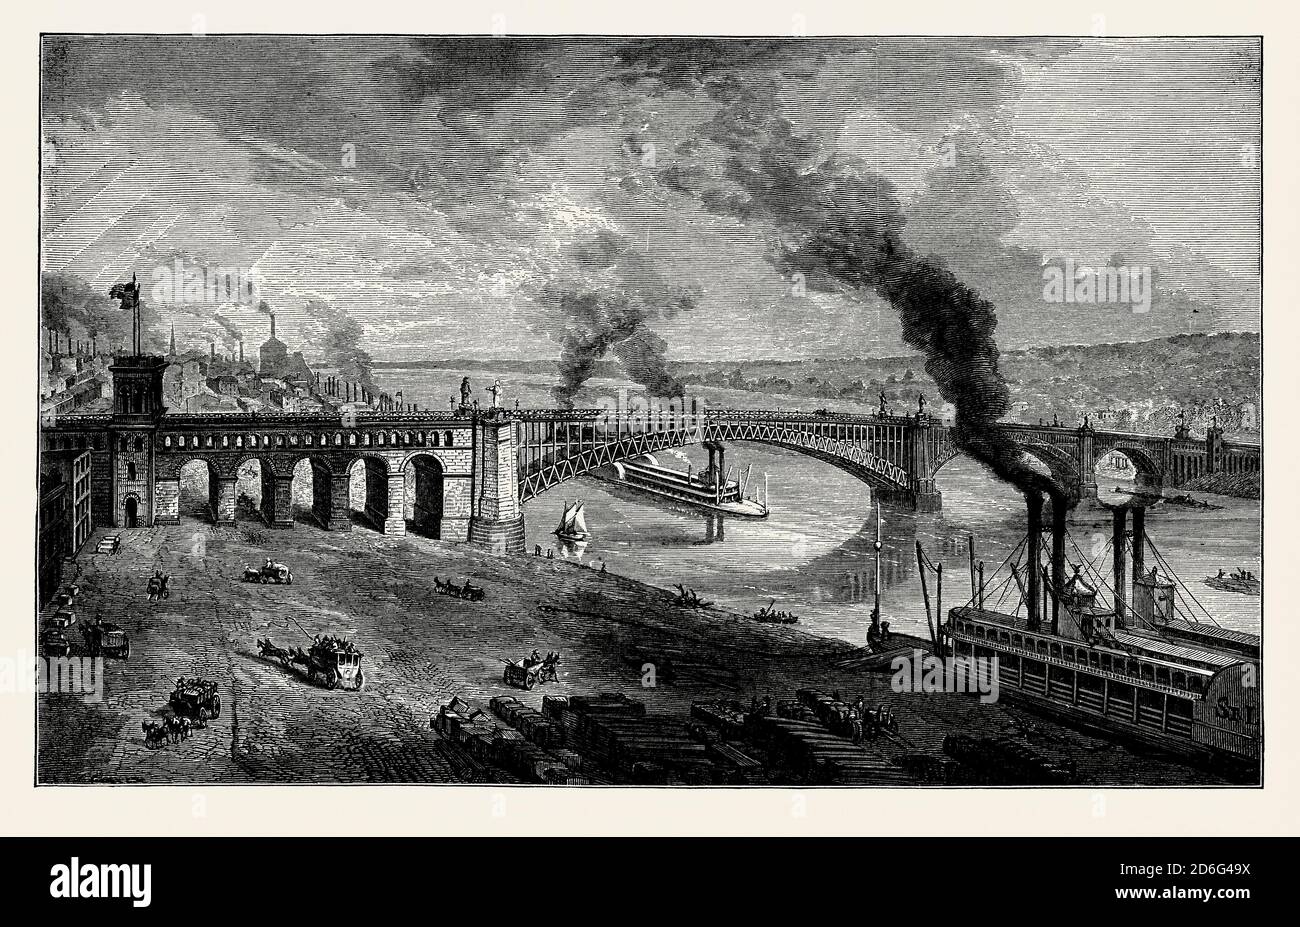 An old engraving of Eads Bridge, a road and railway bridge over the Mississippi River connecting the cities of St Louis, Missouri and East St Louis, Illinois, USA. It is from a Victorian mechanical engineering book of the 1880s. The bridge is named after its designer James Buchanan Eads. Opened in 1874, Eads Bridge is now the oldest bridge on the river. Much of the bridge is wrought iron but the primary load-carrying components were made from steel. The road deck now carries vehicles and pedestrians. The former rail deck below now carries the St. Louis MetroLink light rail system. Stock Photo